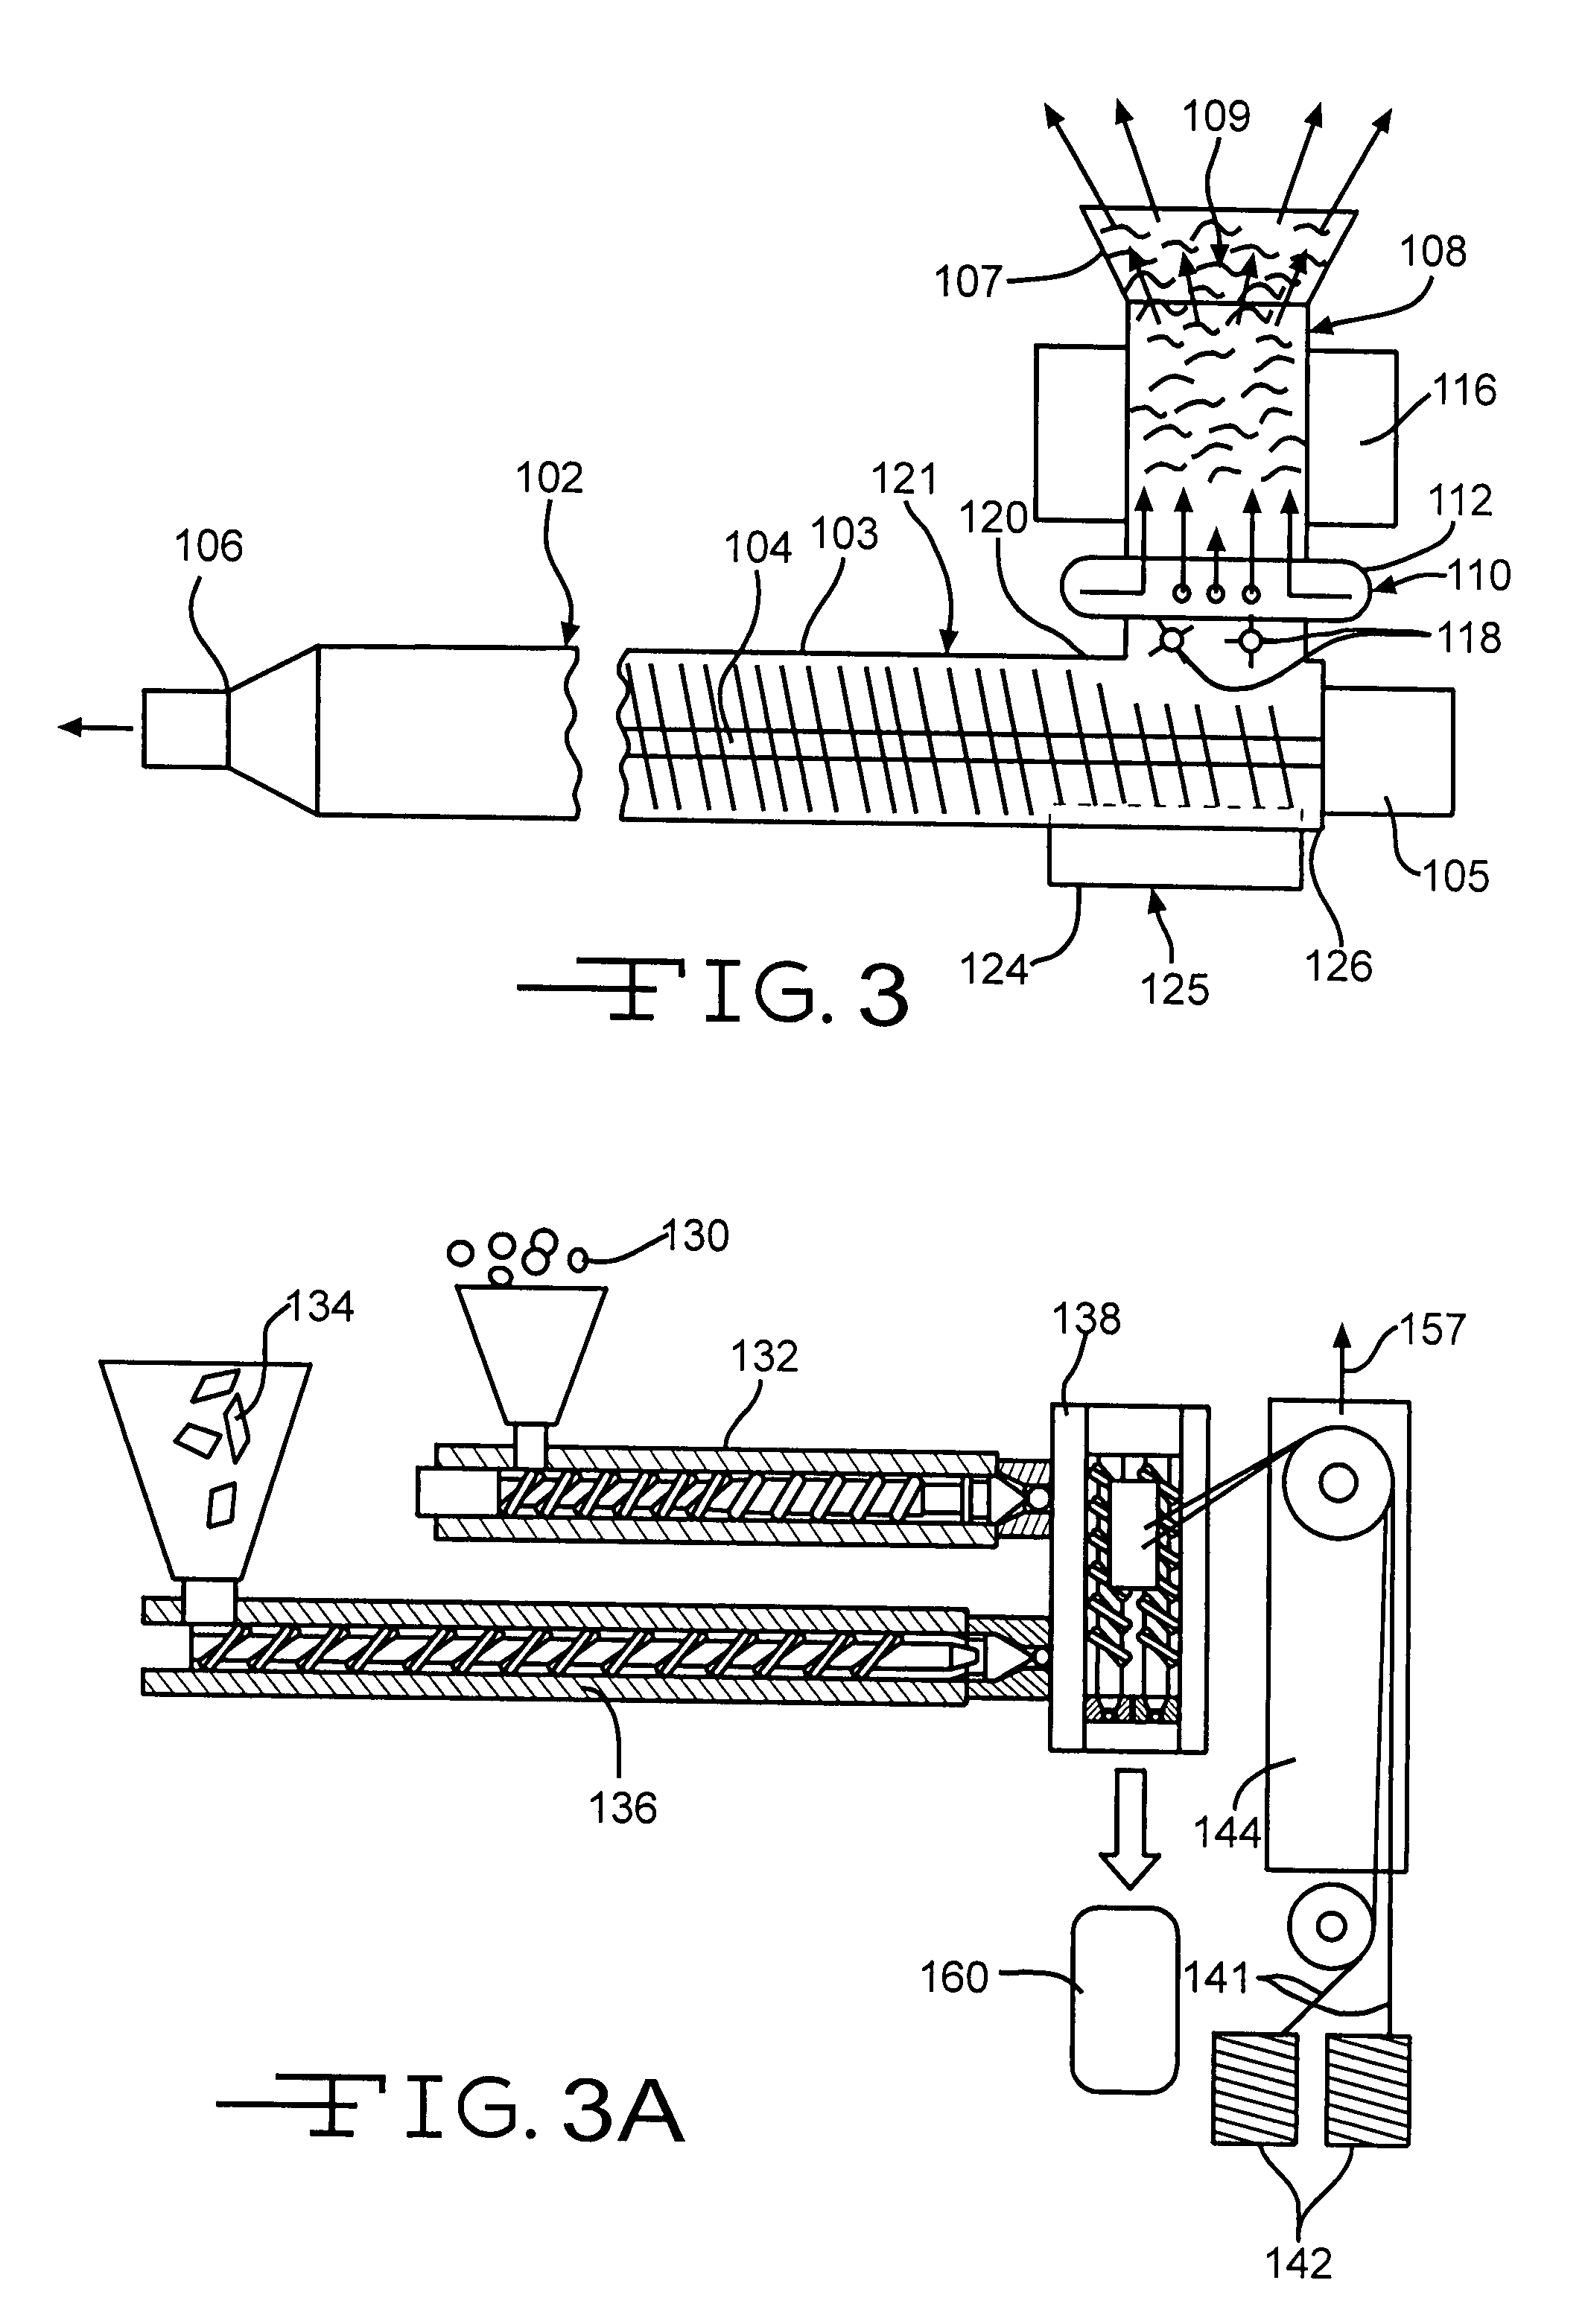 Method and system for forming reinforcing fibers and reinforcing fibers having particulate protuberances directly attached to the surfaces